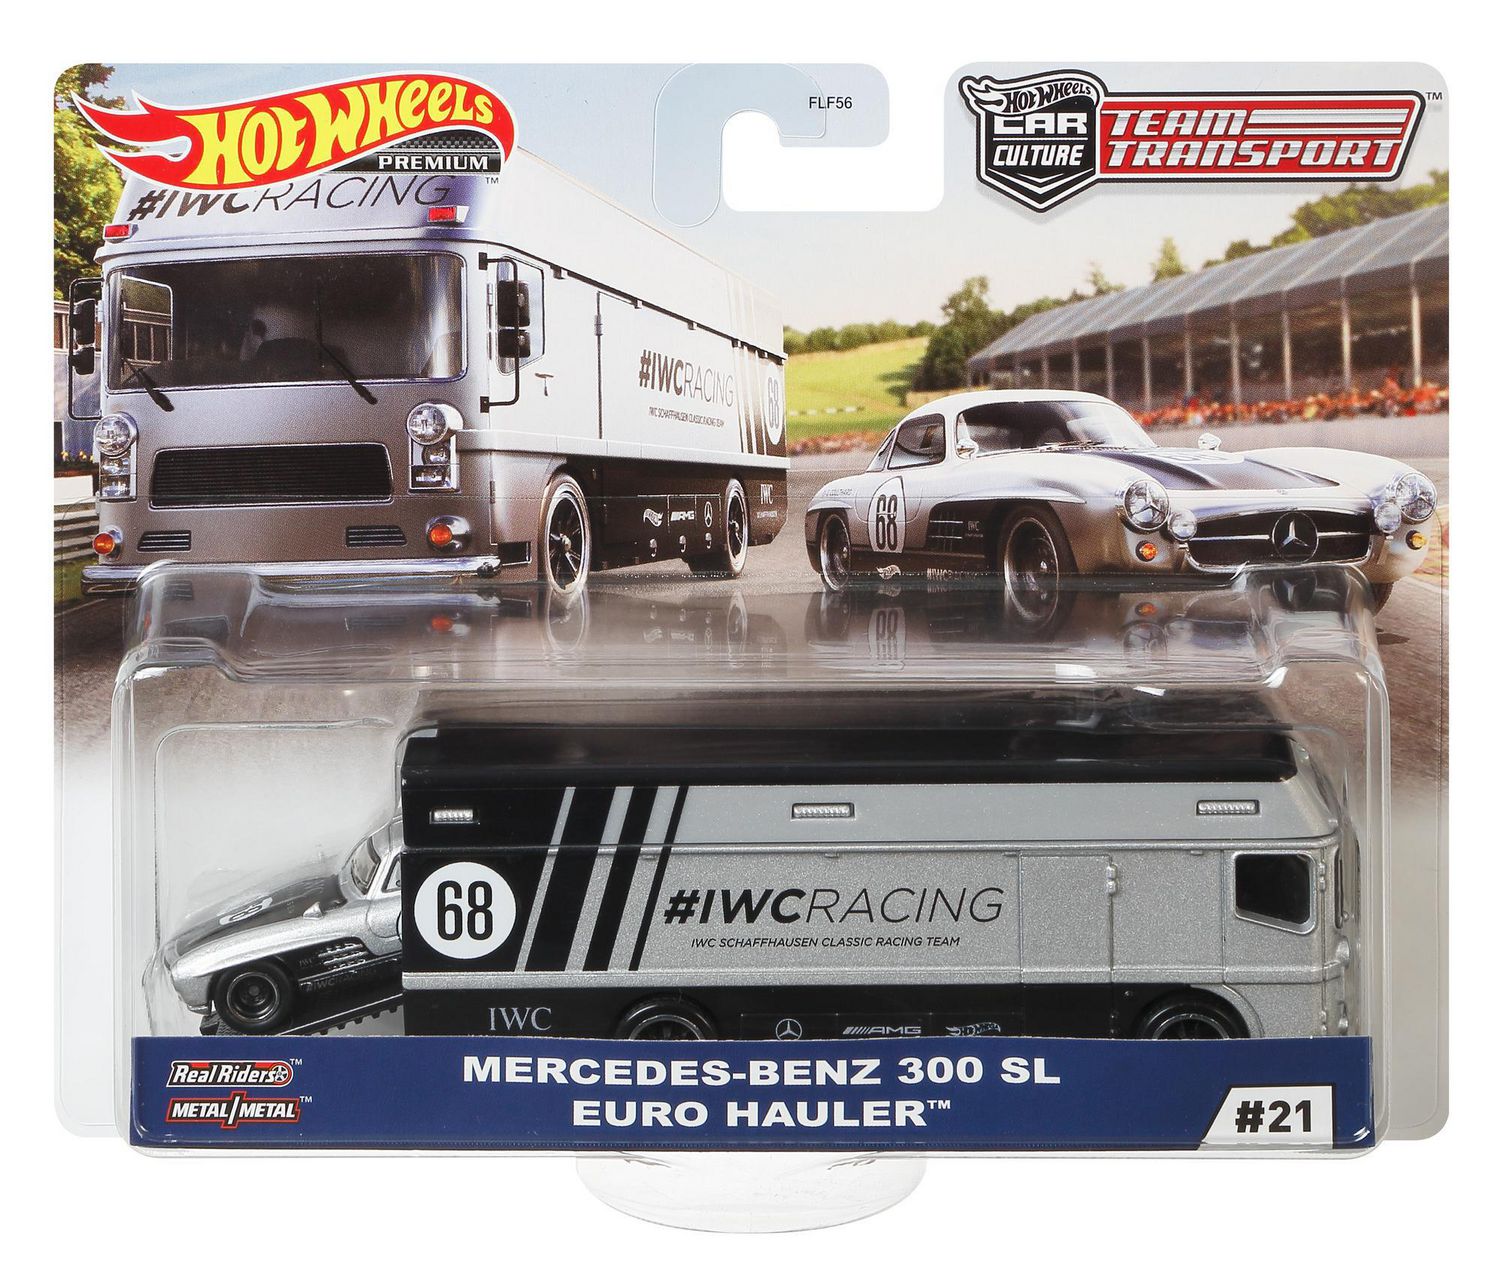 Hot Wheels Team Transport Models and Component Car 1:64 scale